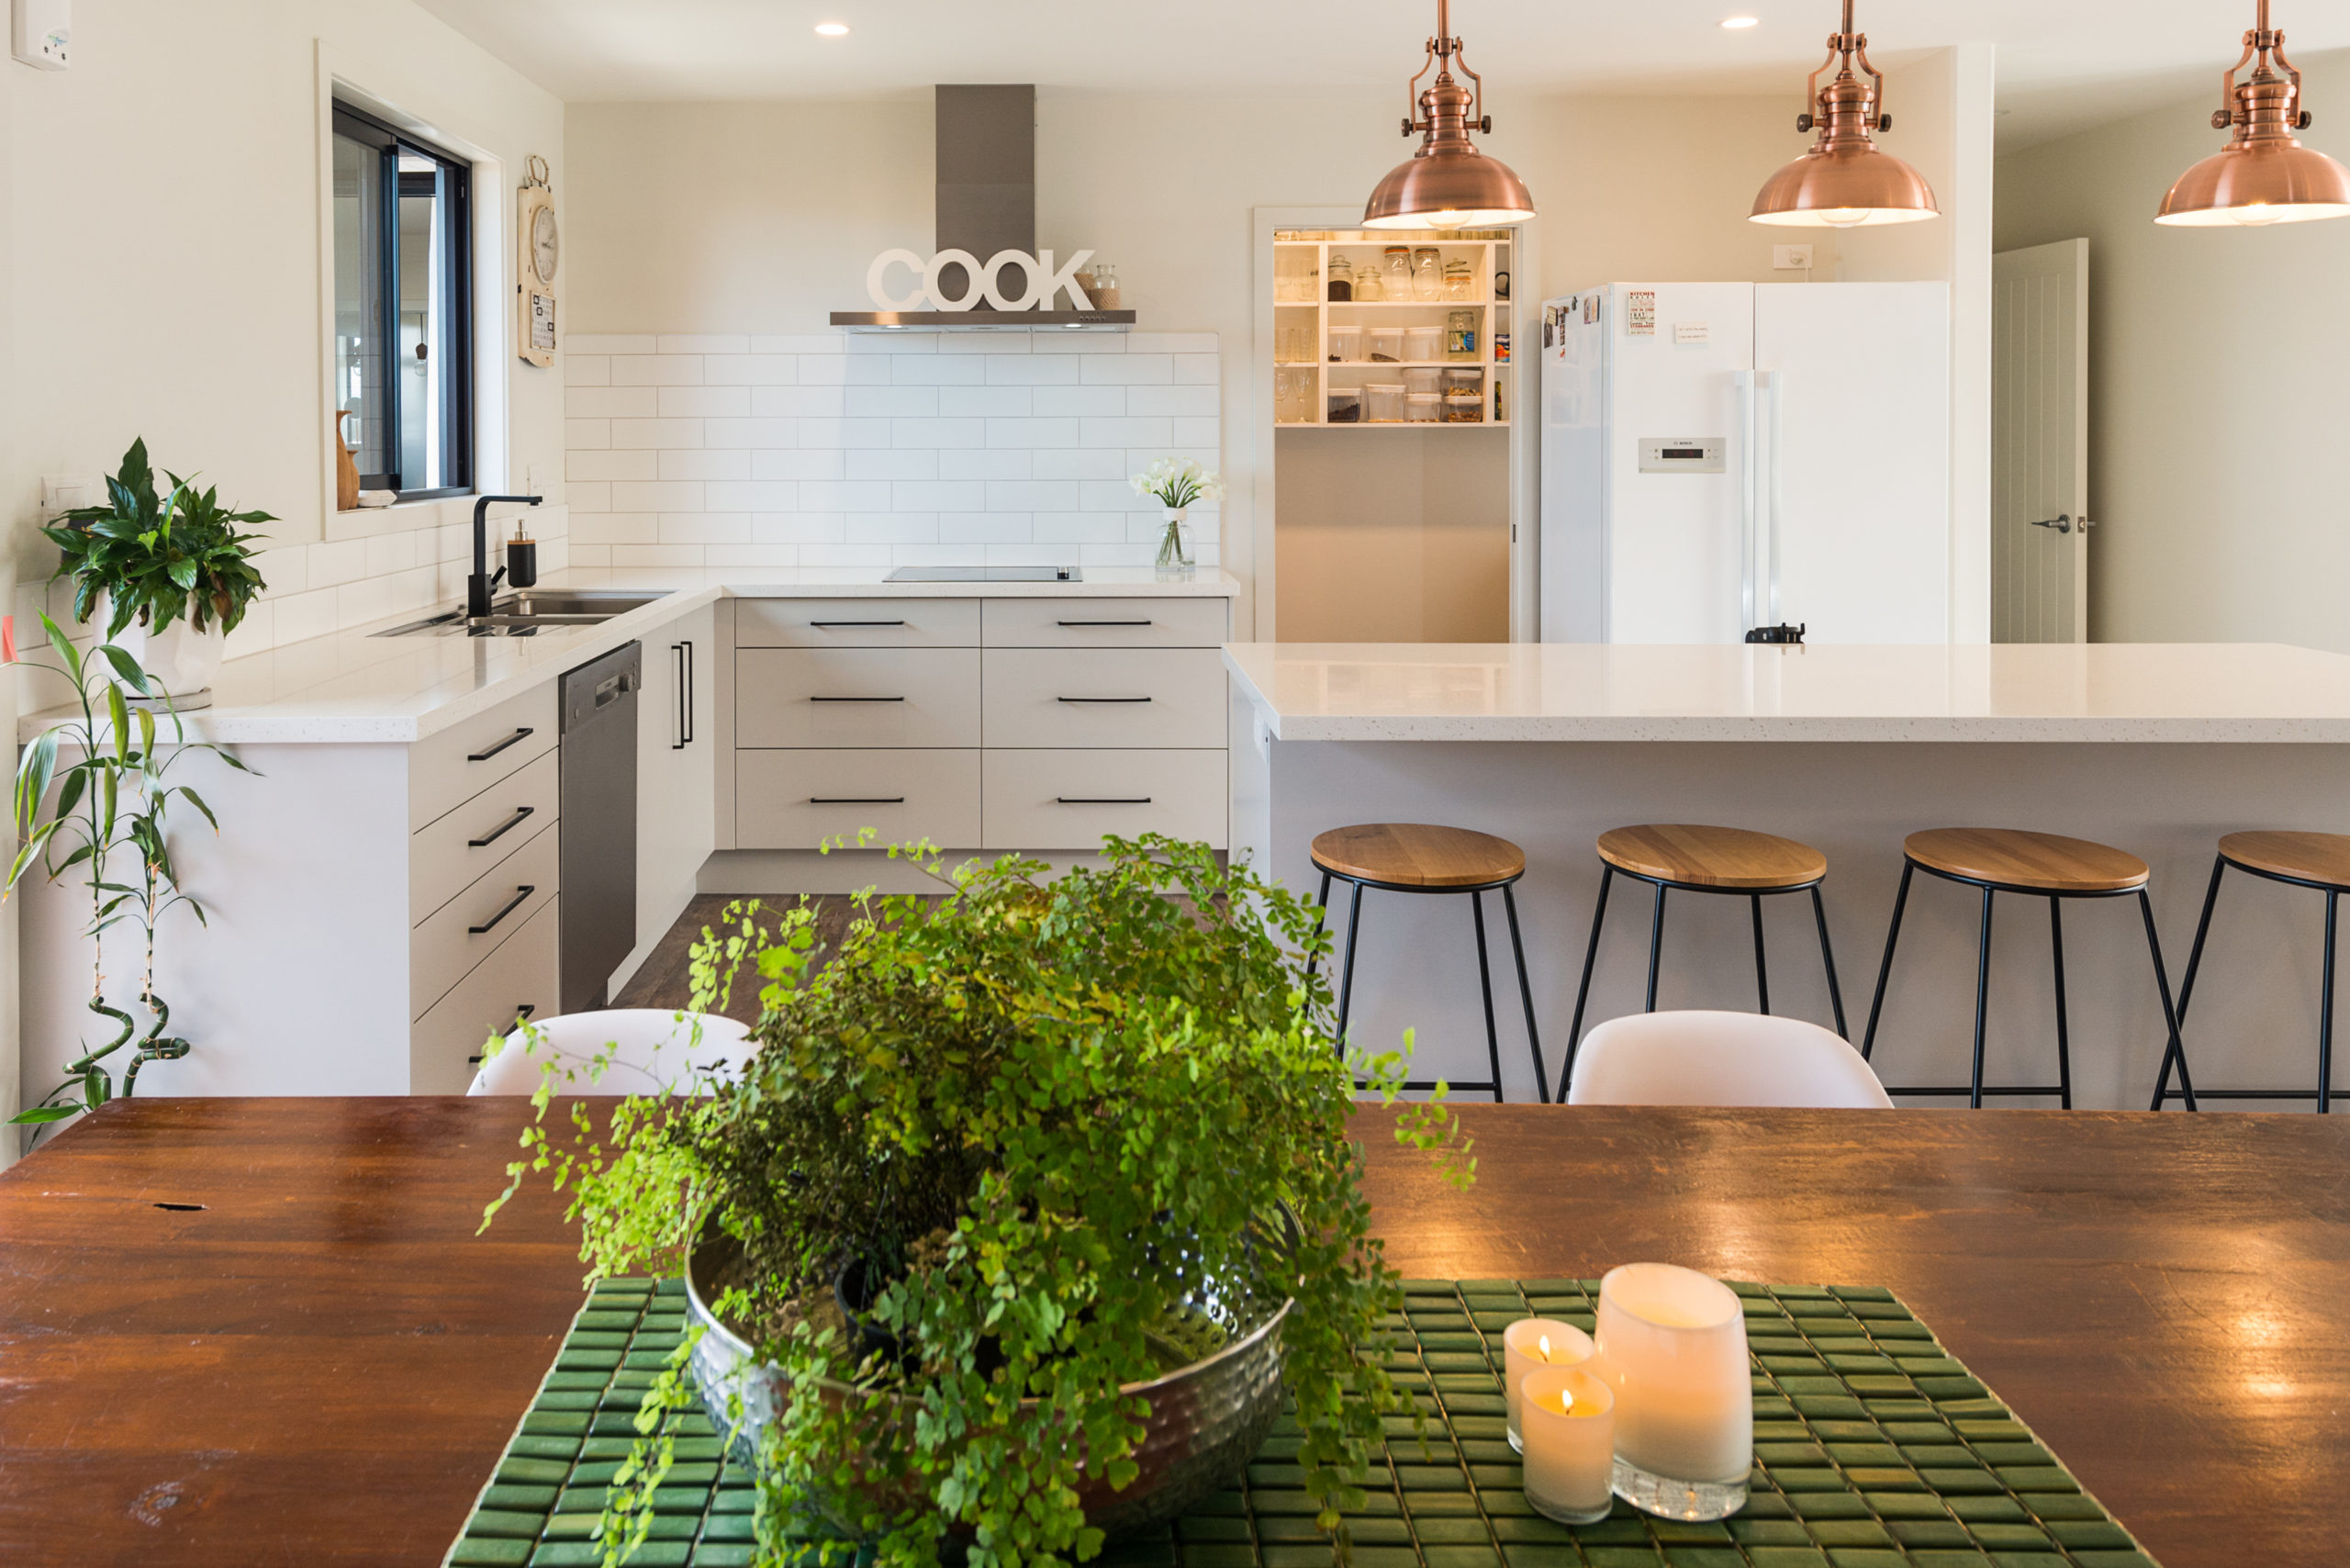 Designing Your Dream Home: Trends and Inspirations from Across New Zealand with Highmark Homes